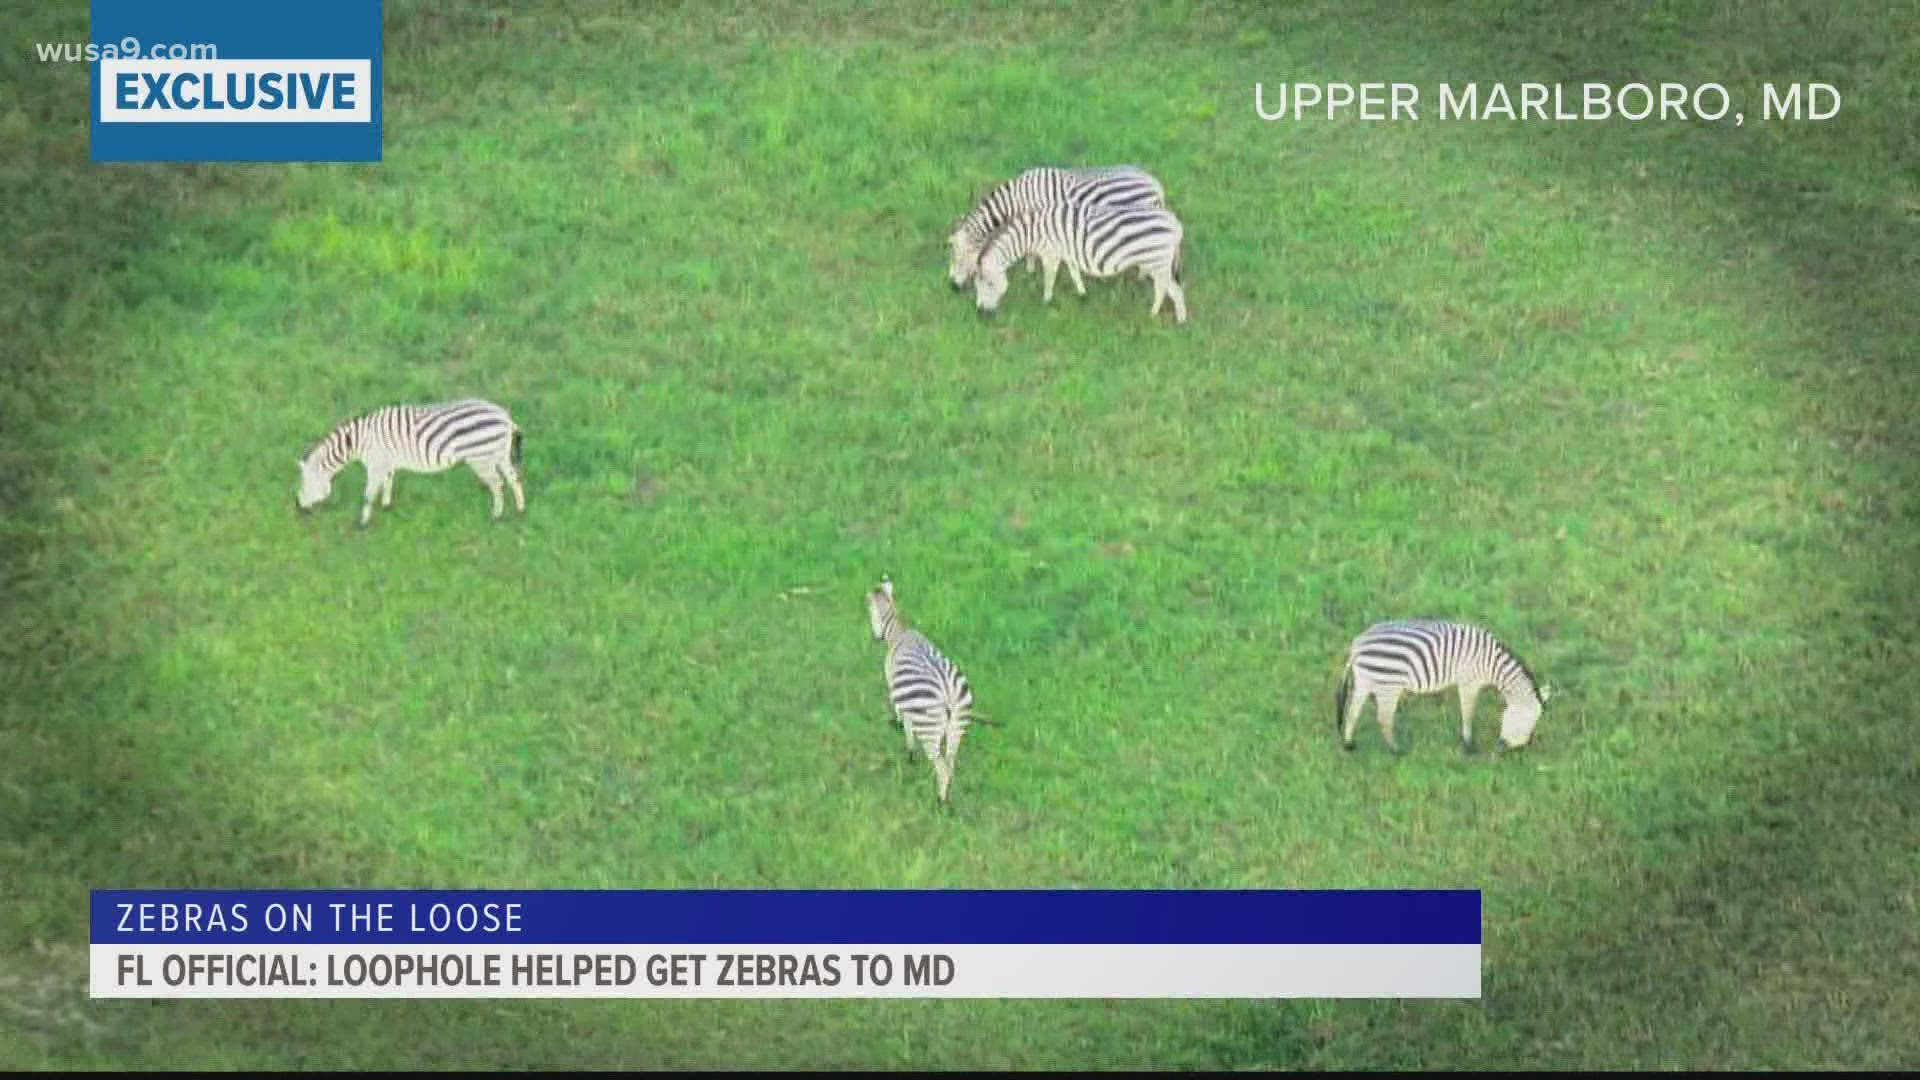 Florida wildlife conservation authorities say the case of a man who moved a herd of zebras to Maryland exposes serious shortcomings in laws meant to protect animals.